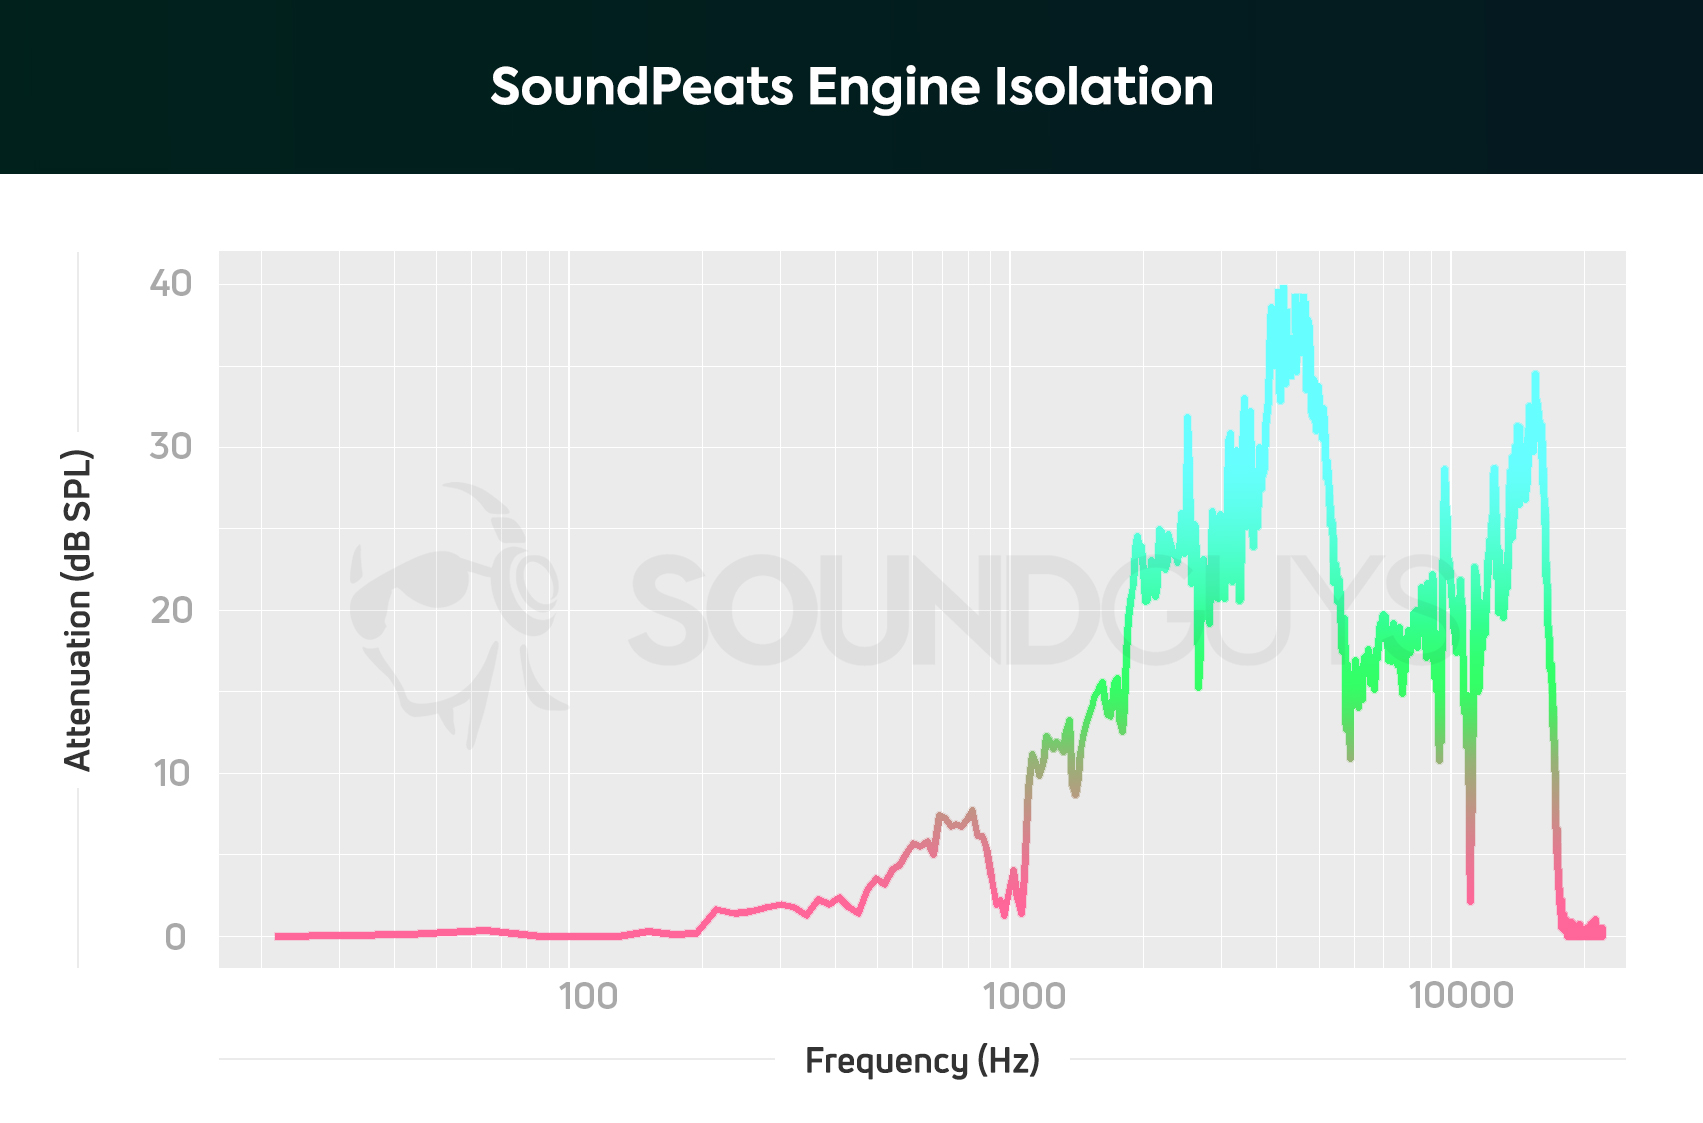 An isolation chart of the SoundPeats Engine wireless earbuds.